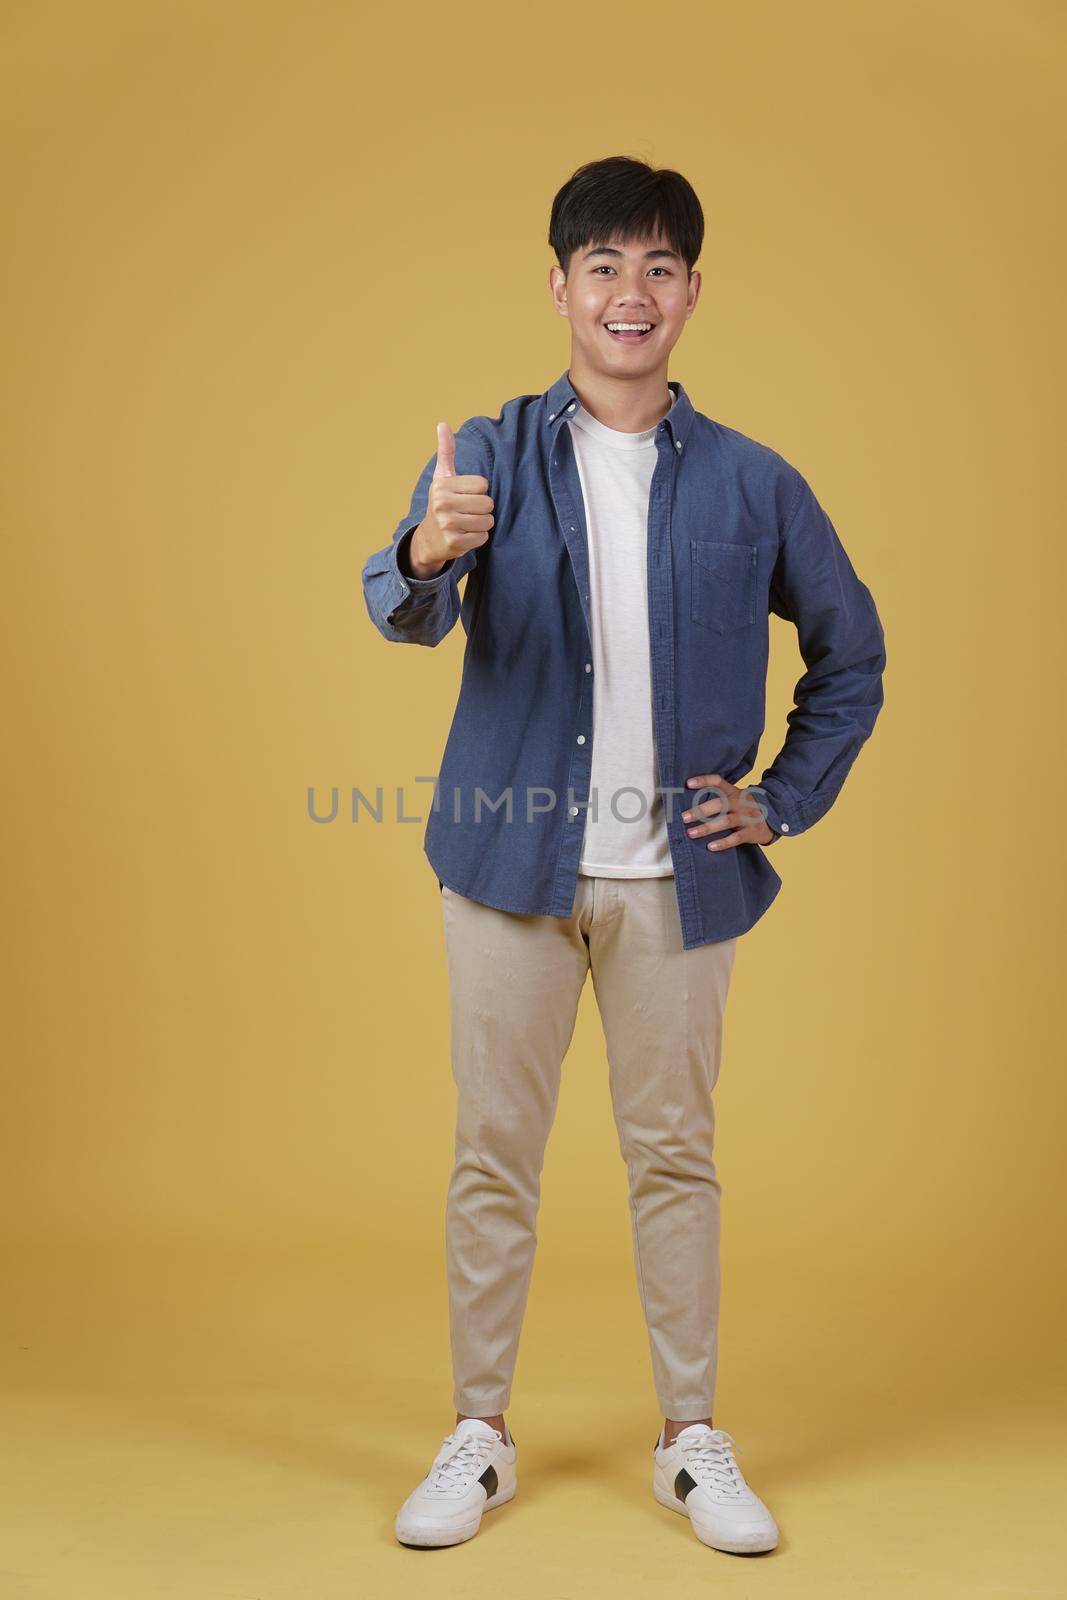 portrait of smiling positive young asian man dressed casually with thumb up gesture approving expression isolated on yellow studio background